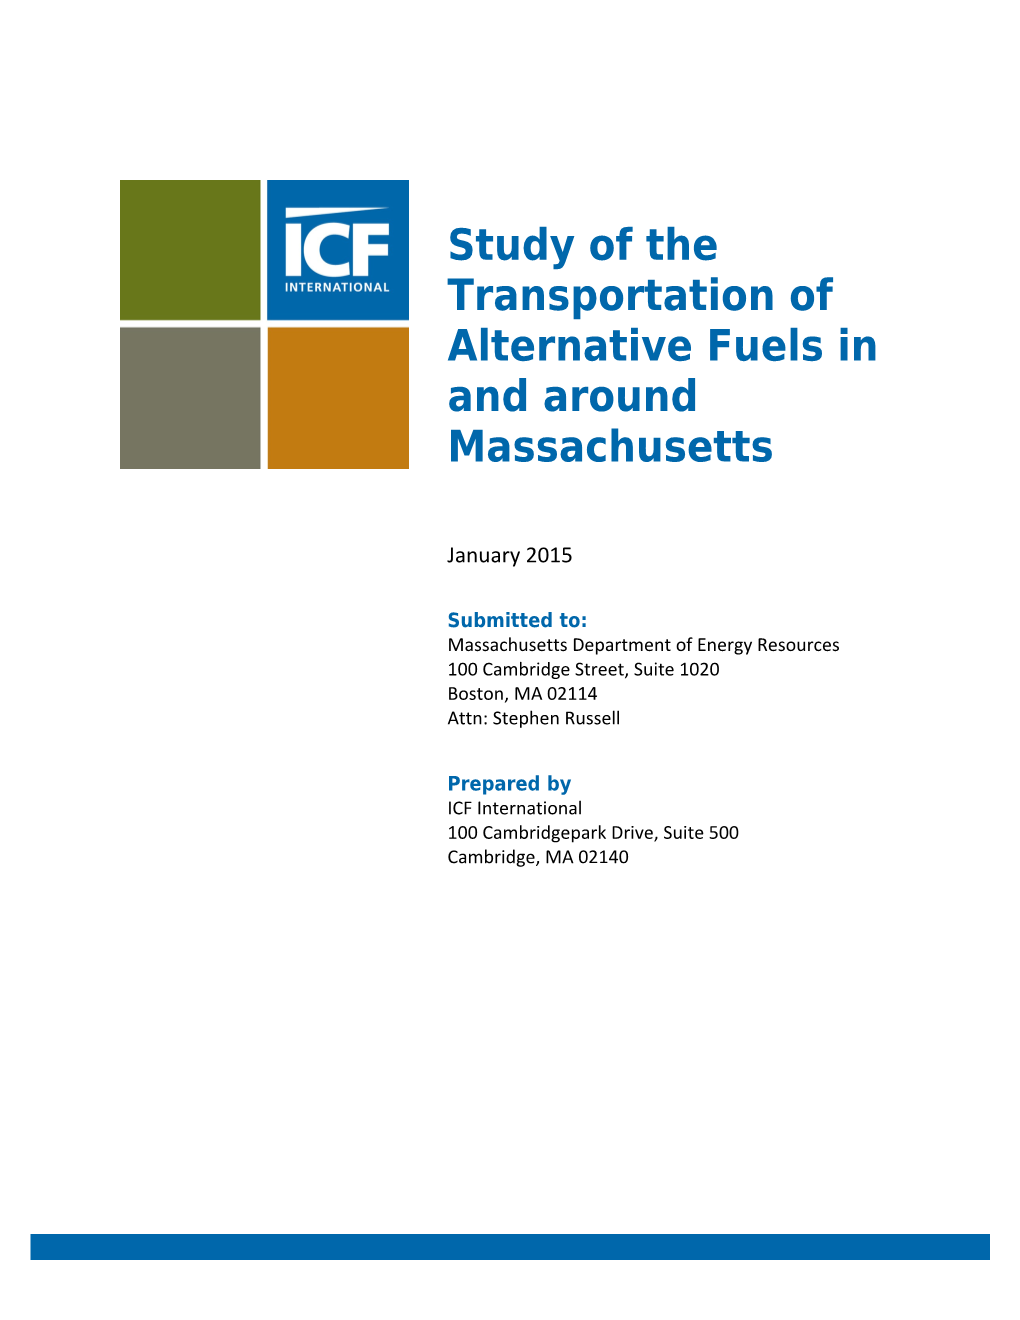 Study of the Transportation of Alternative Fuels in and Around Massachusetts